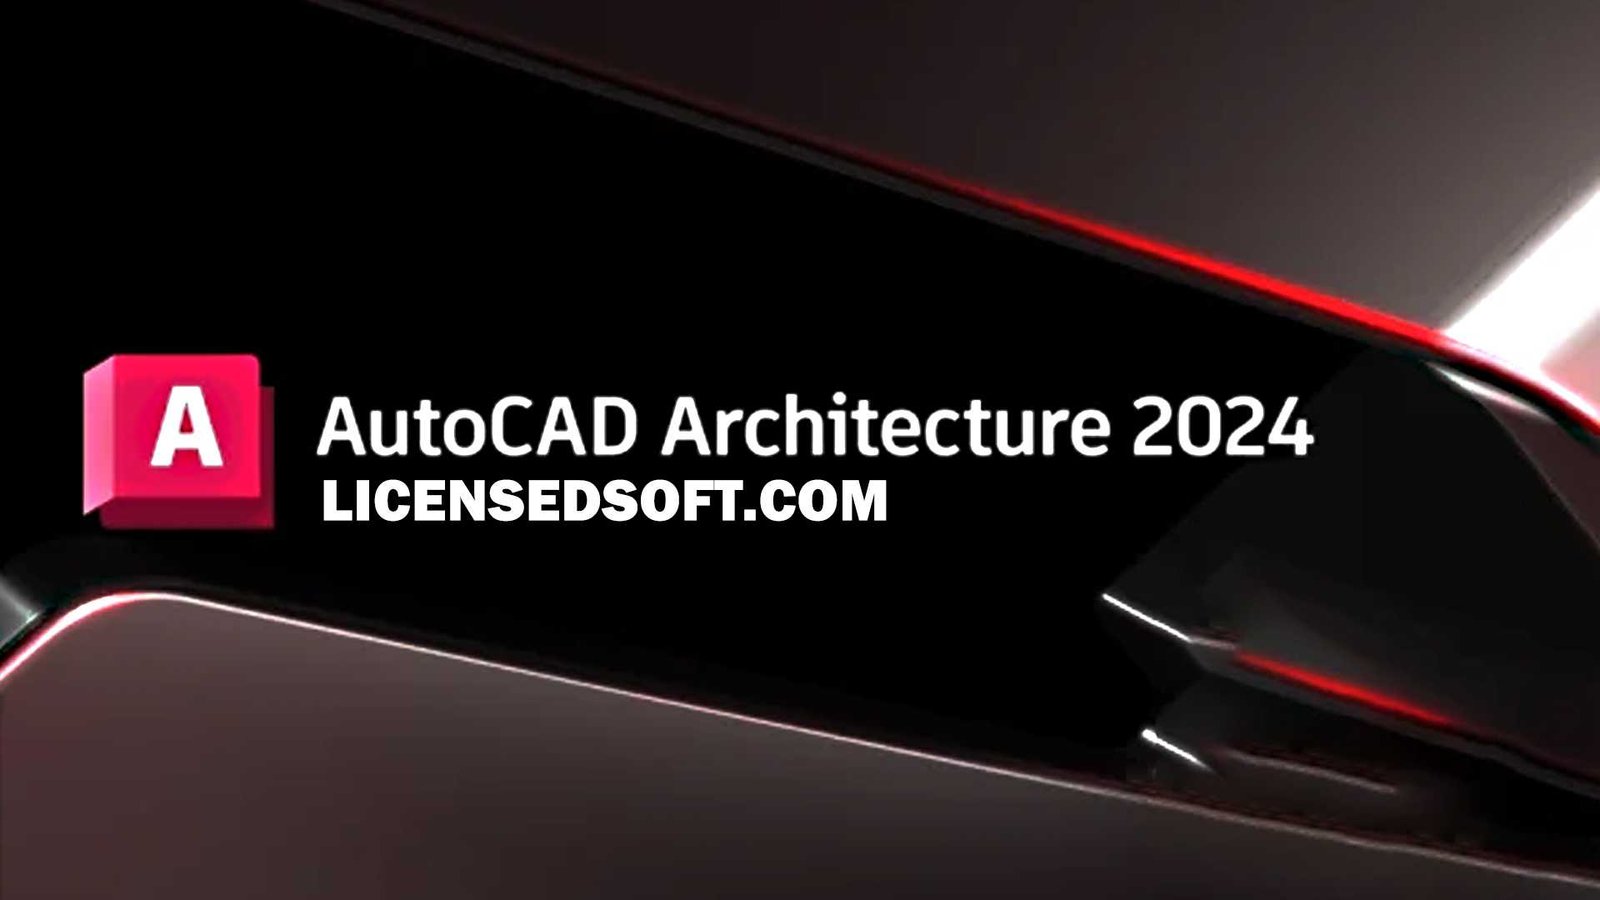 Autodesk AutoCAD Architecture 2024 Cover By LicensedSoft